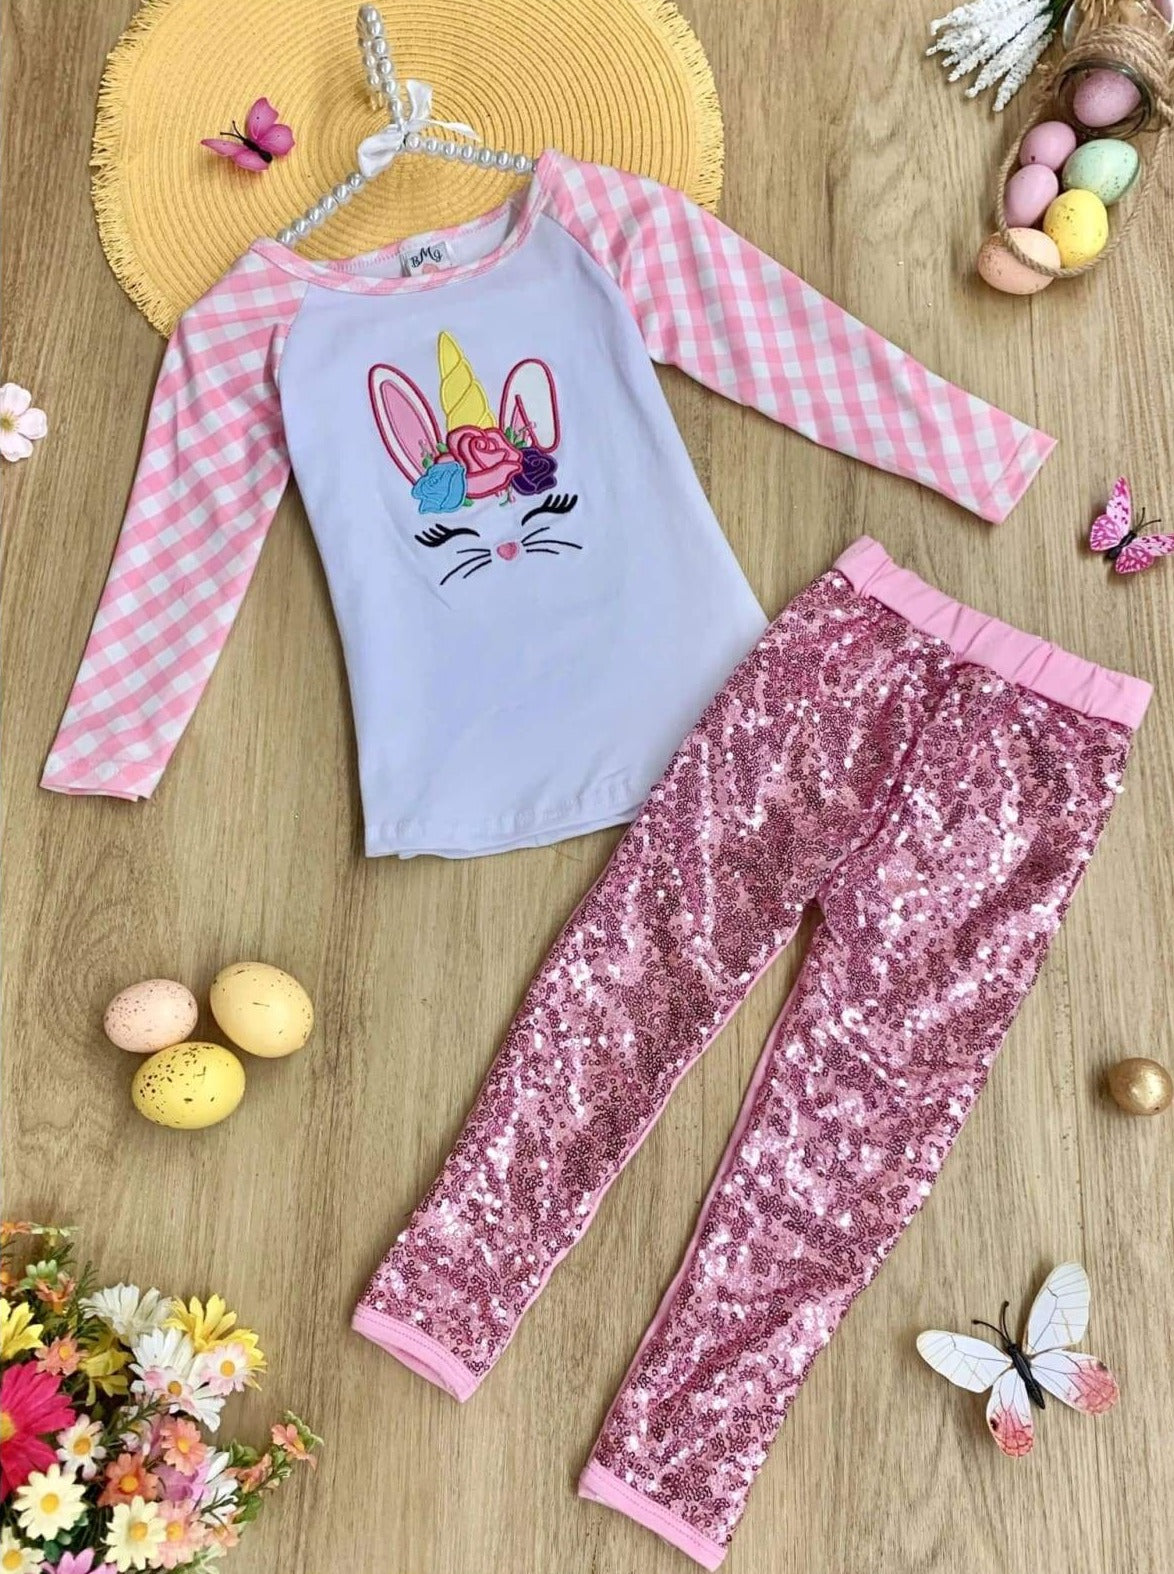 Mia Belle Girls Easter Themed Applique Top And Sequin Leggings Set